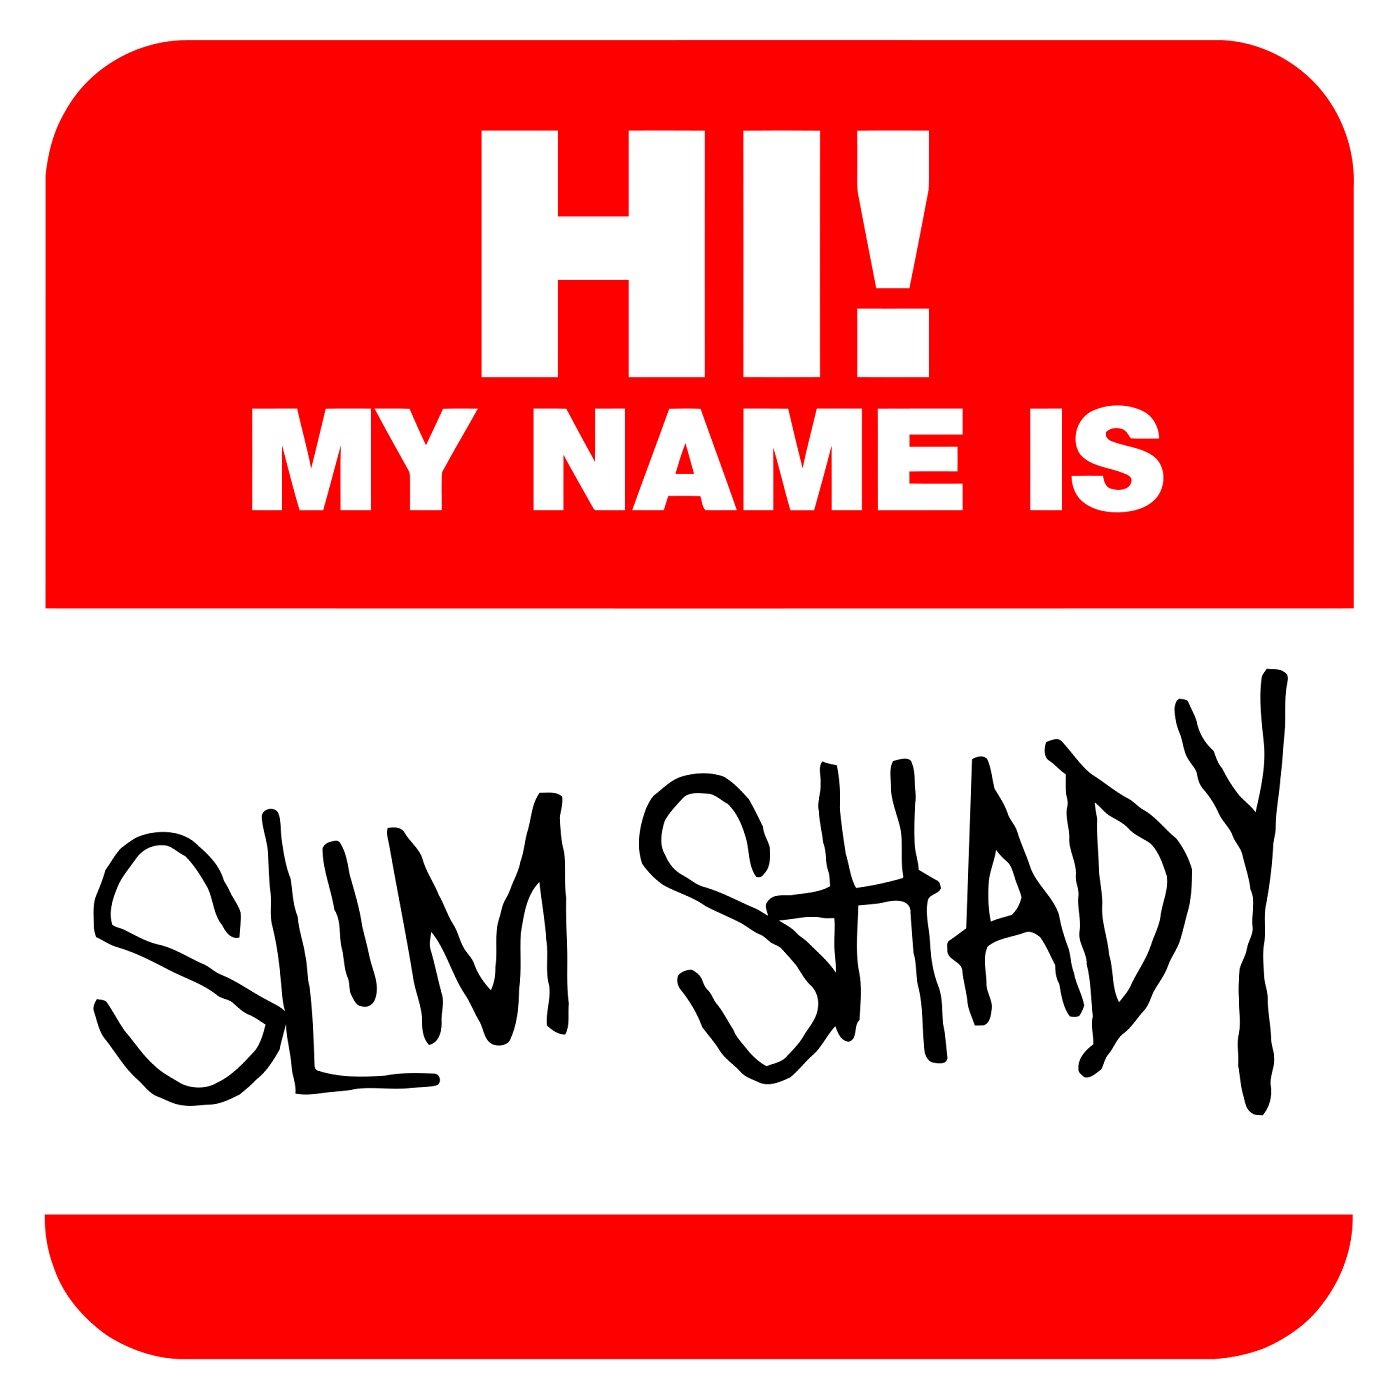 My name is beautiful. Hello my name is Slim Shady. My name is. My name is Emine. Слим Шэди my name is.